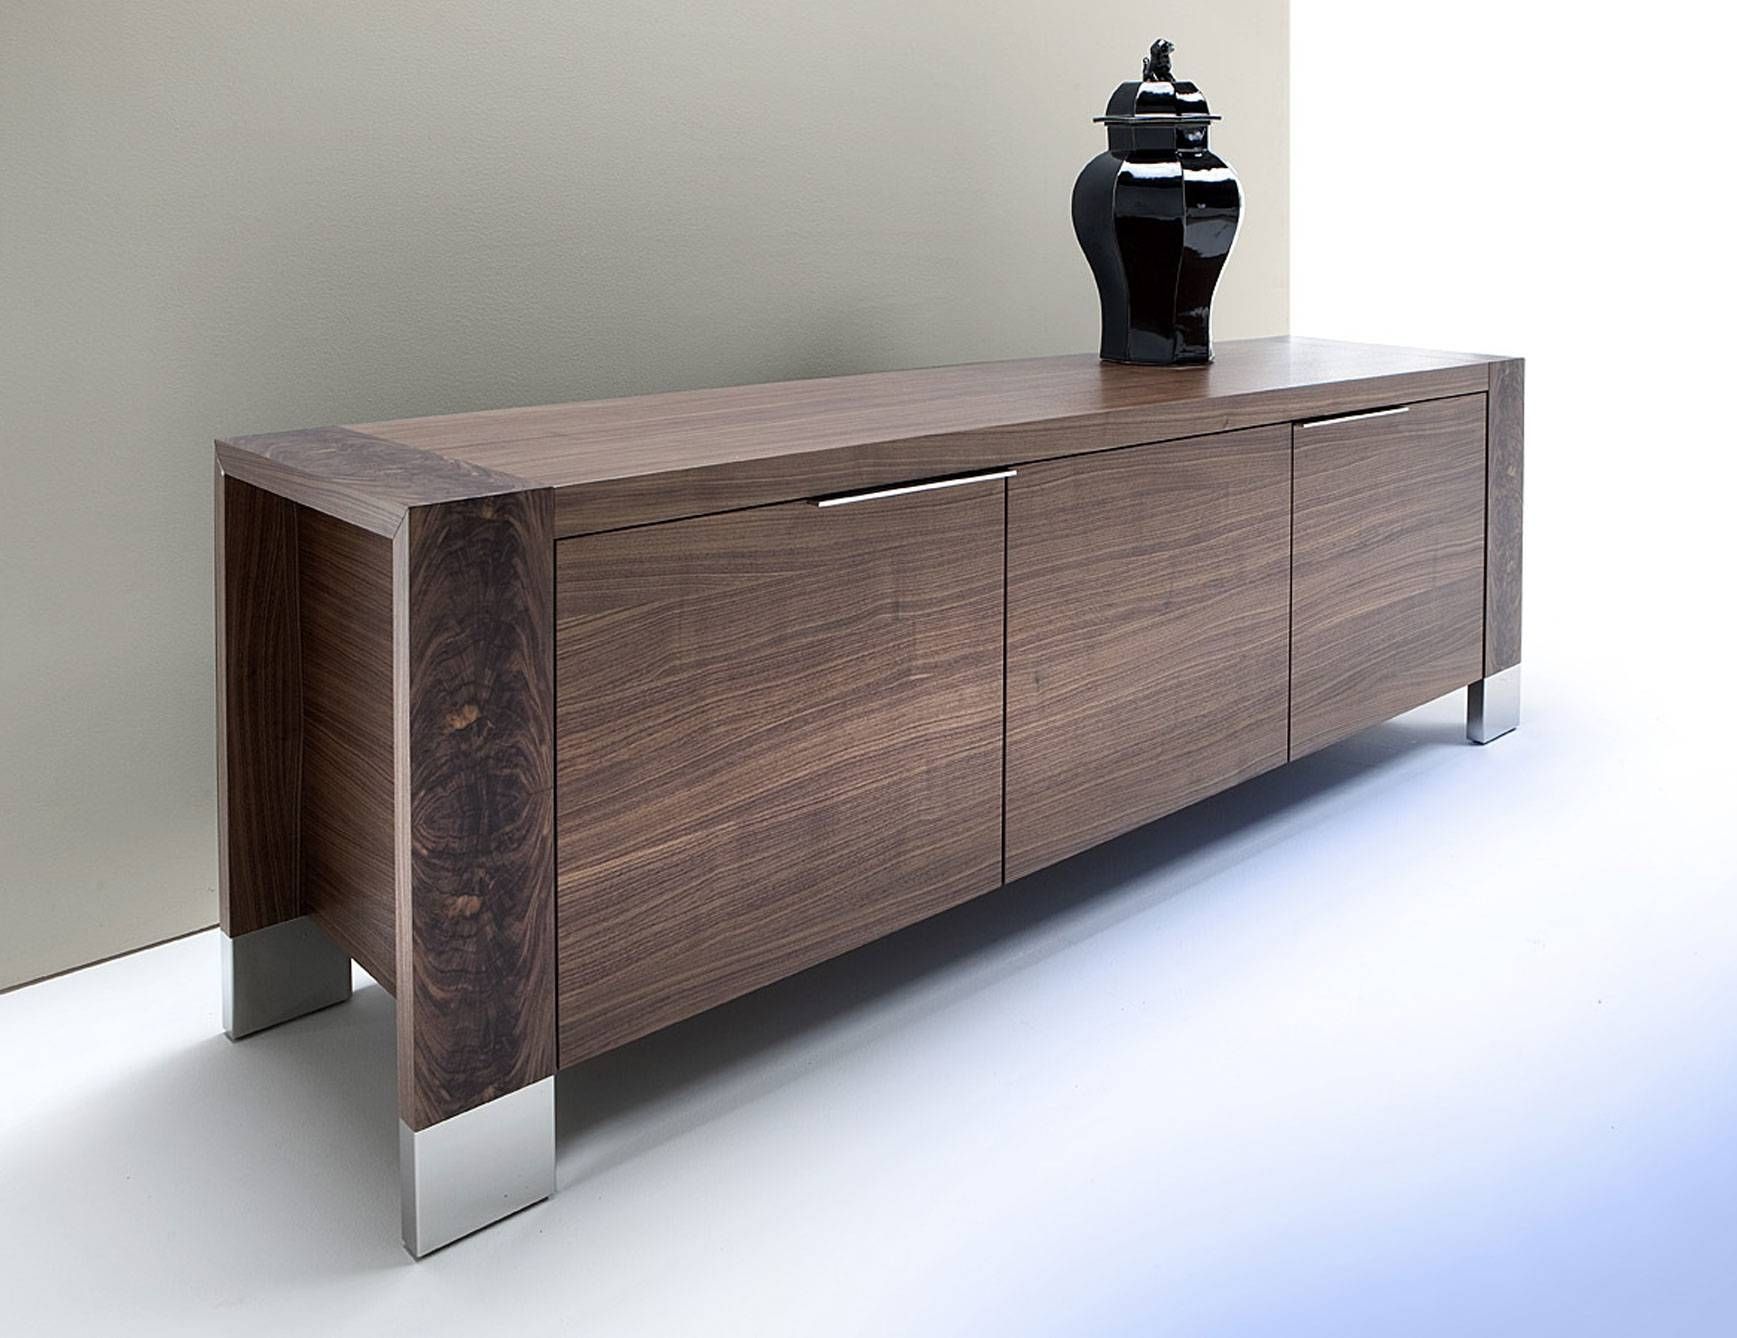 Sideboards Amusing Buffet Storage Credenza Buffet Storage Within Most Recently Released Credenza Sideboards 